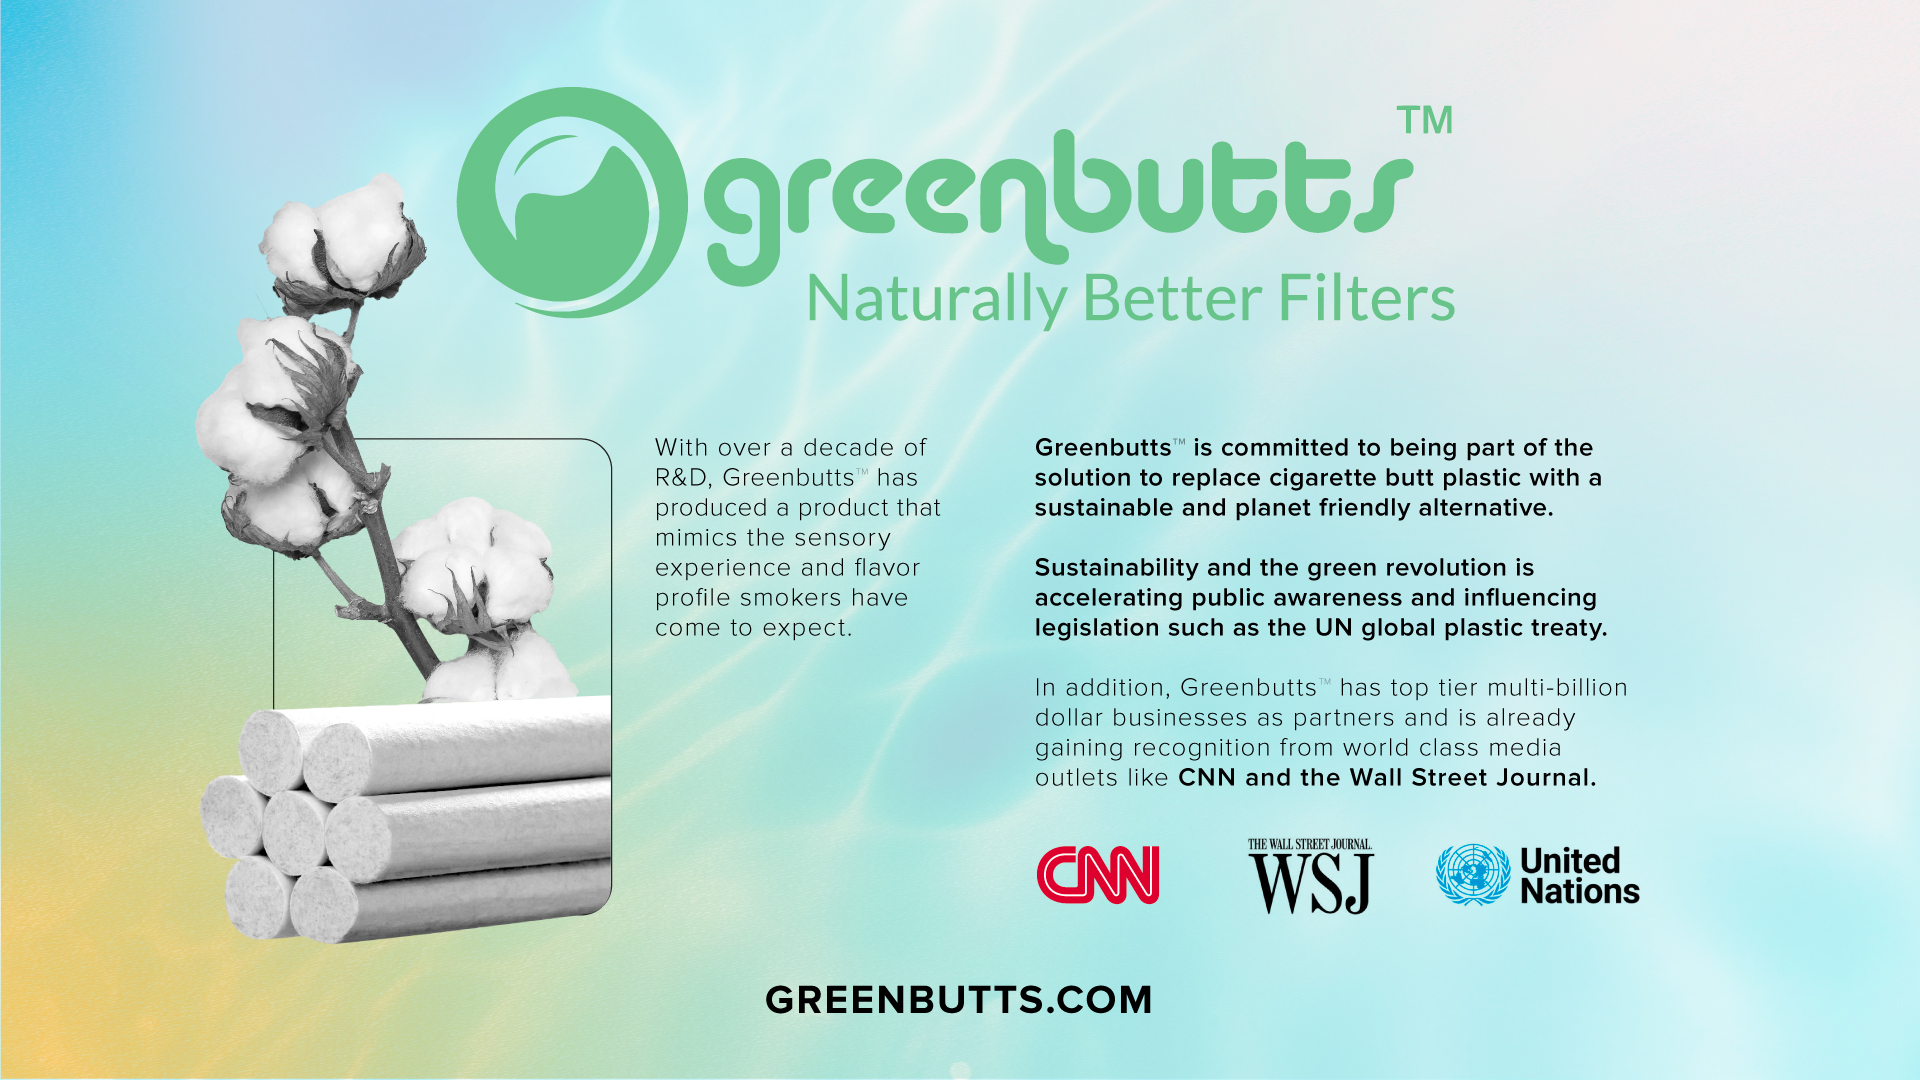 Why Invest With Greenbutts?